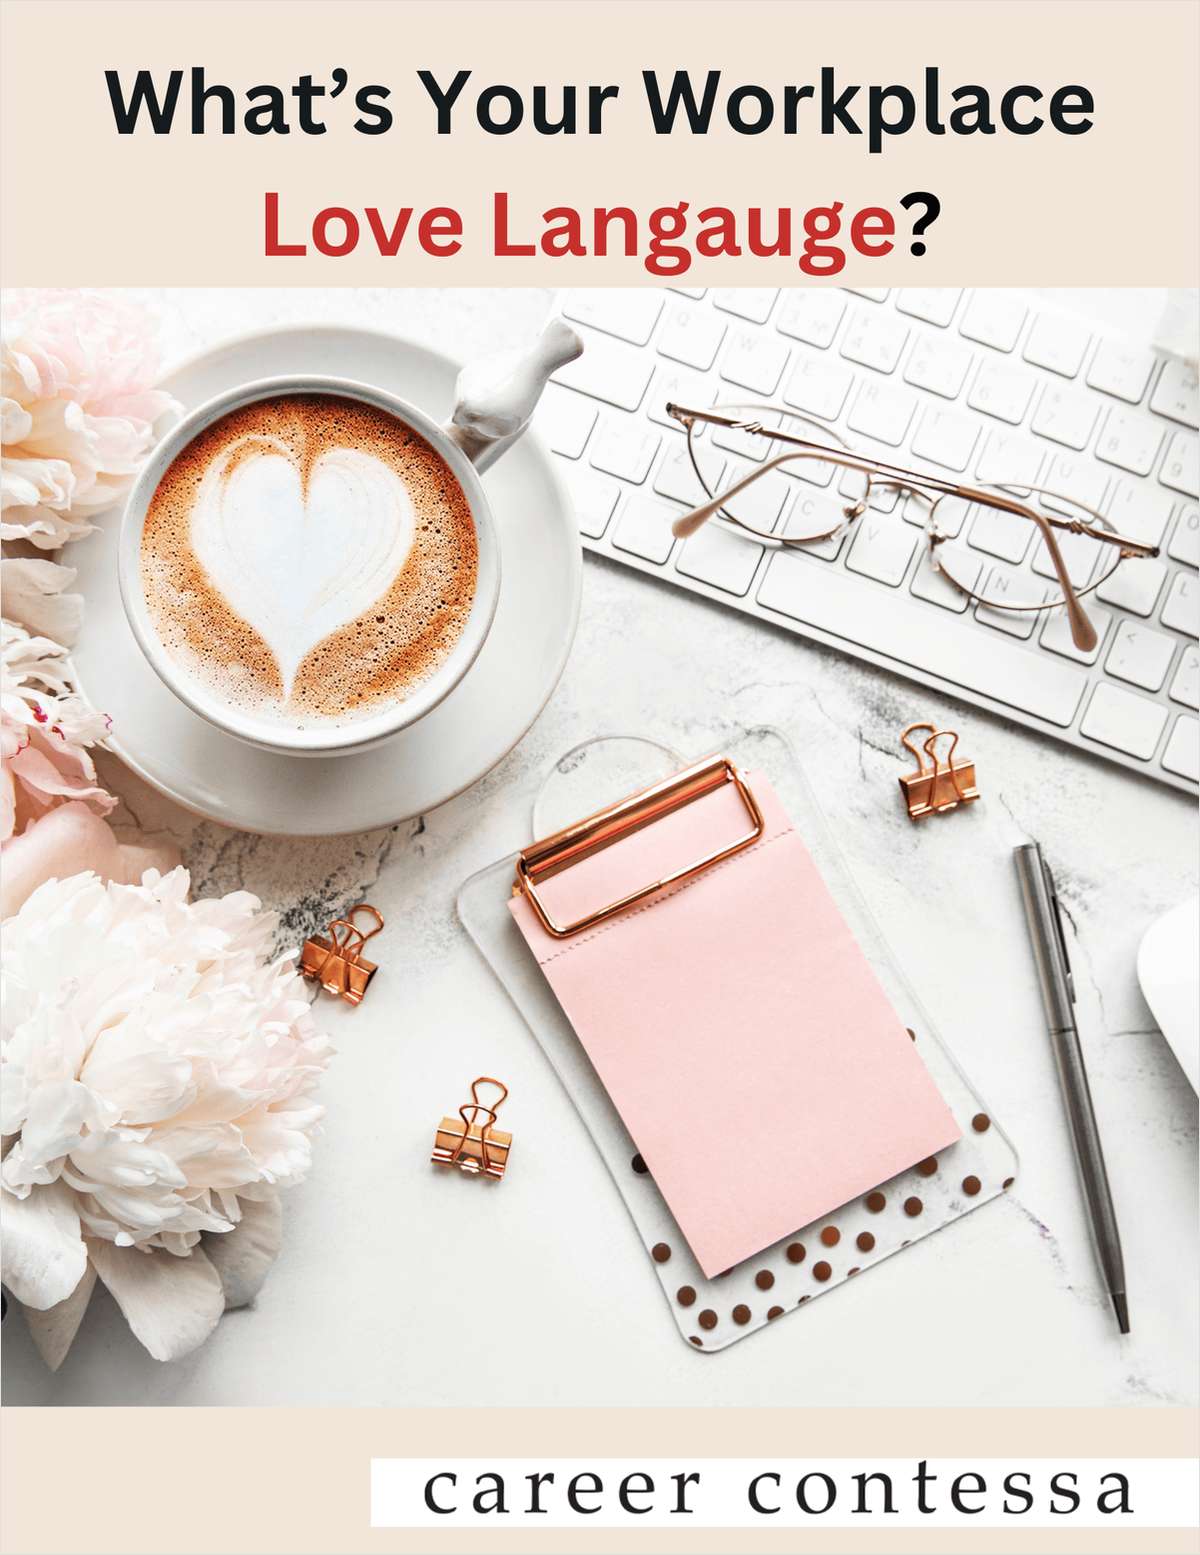 What's Your Workplace Love Language?